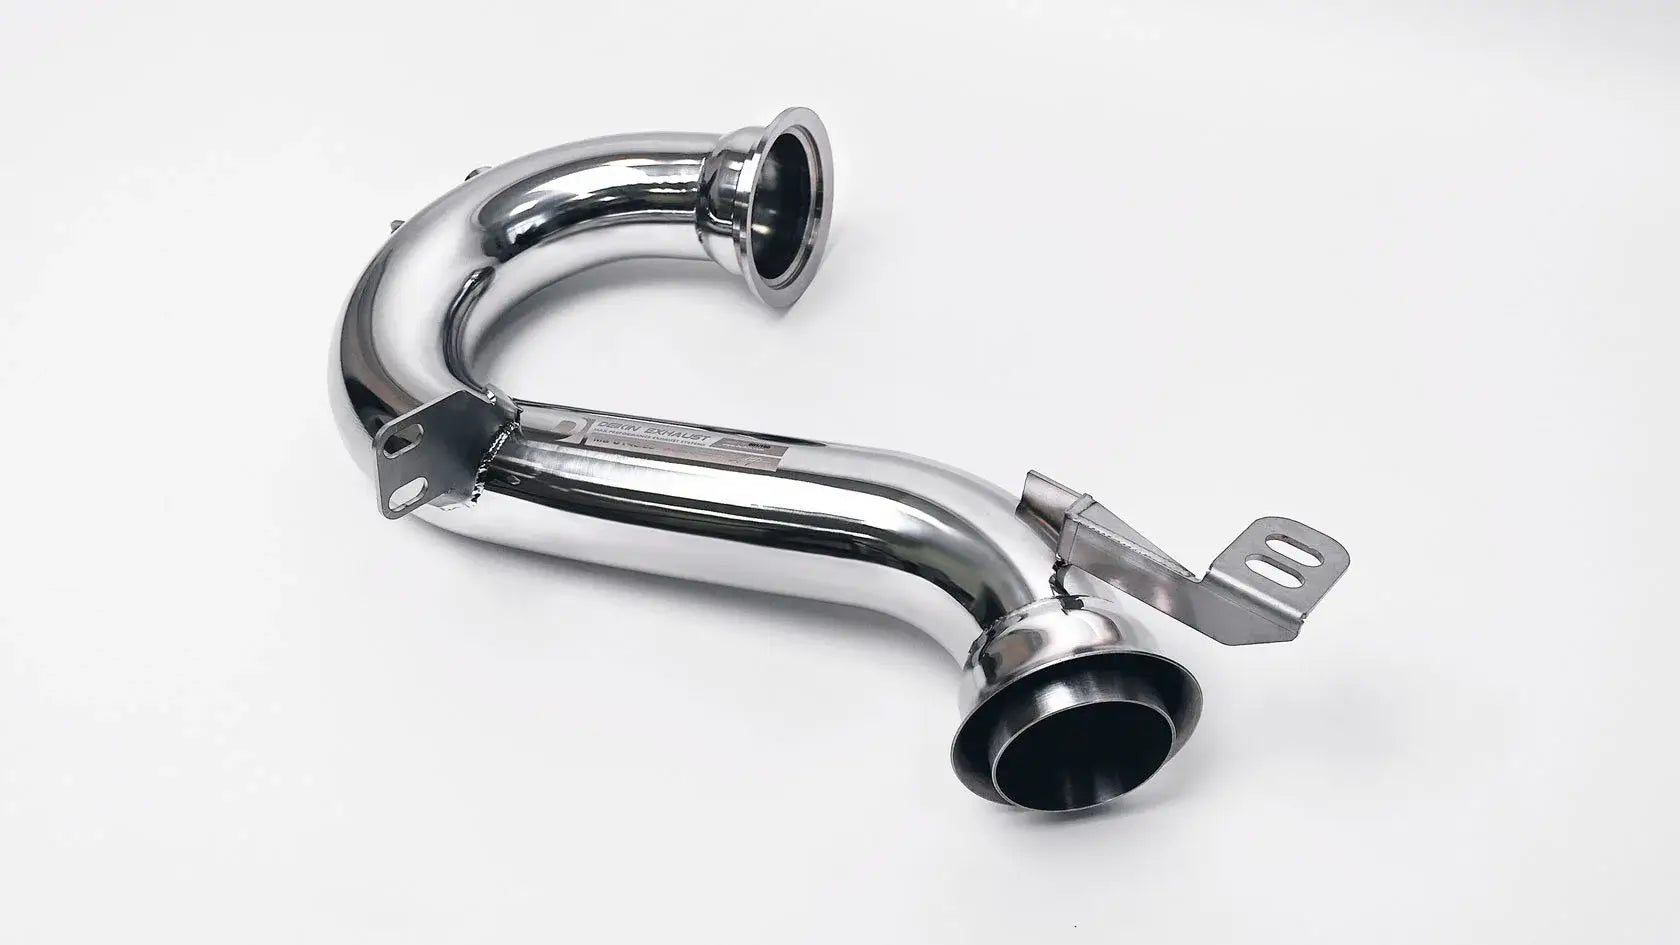 DEIKIN 10-MB.GLE53.V167-DP Downpipe for Mercedes-AMG GLE53 (V167) without HeatShield Photo-0 